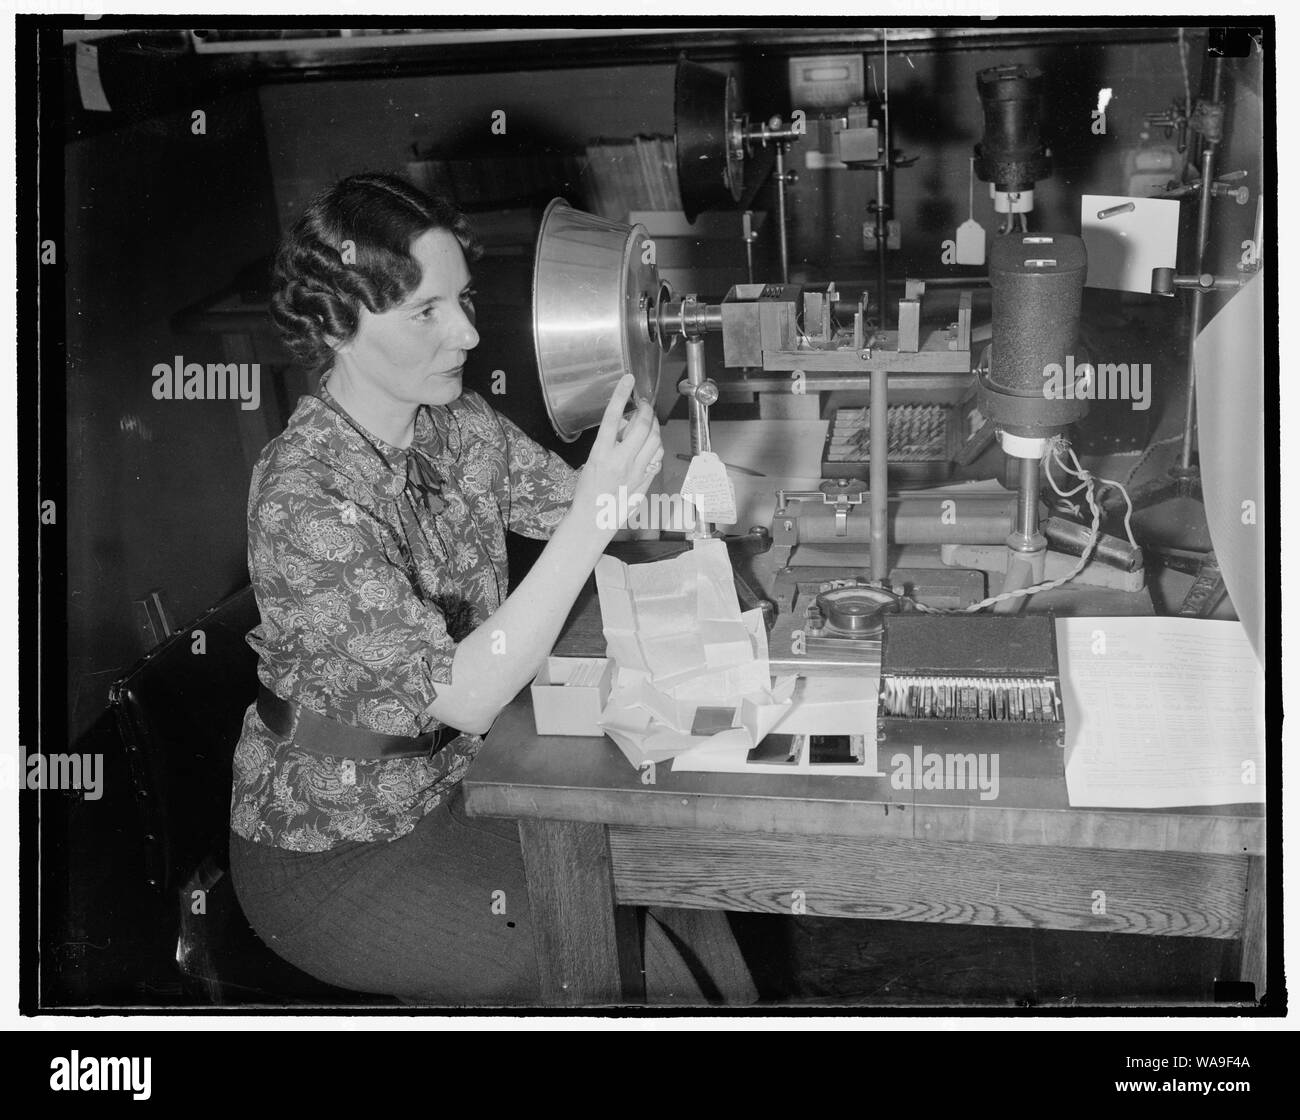 Checks railroad signal glasses for government. Washington, D.C., Sept. 29. Red should be read and orange should be orange and never should the colors in railroad signal glasses be so near alike as to confuse a trainman. The Government, through Mrs. Geraldine W. Haupt, Color Expert of the National Bureau of Standards, tests all railroad signal glasses to determine if the color value is true and also to see that they conform to certain specifications. 9/29/37 Stock Photo